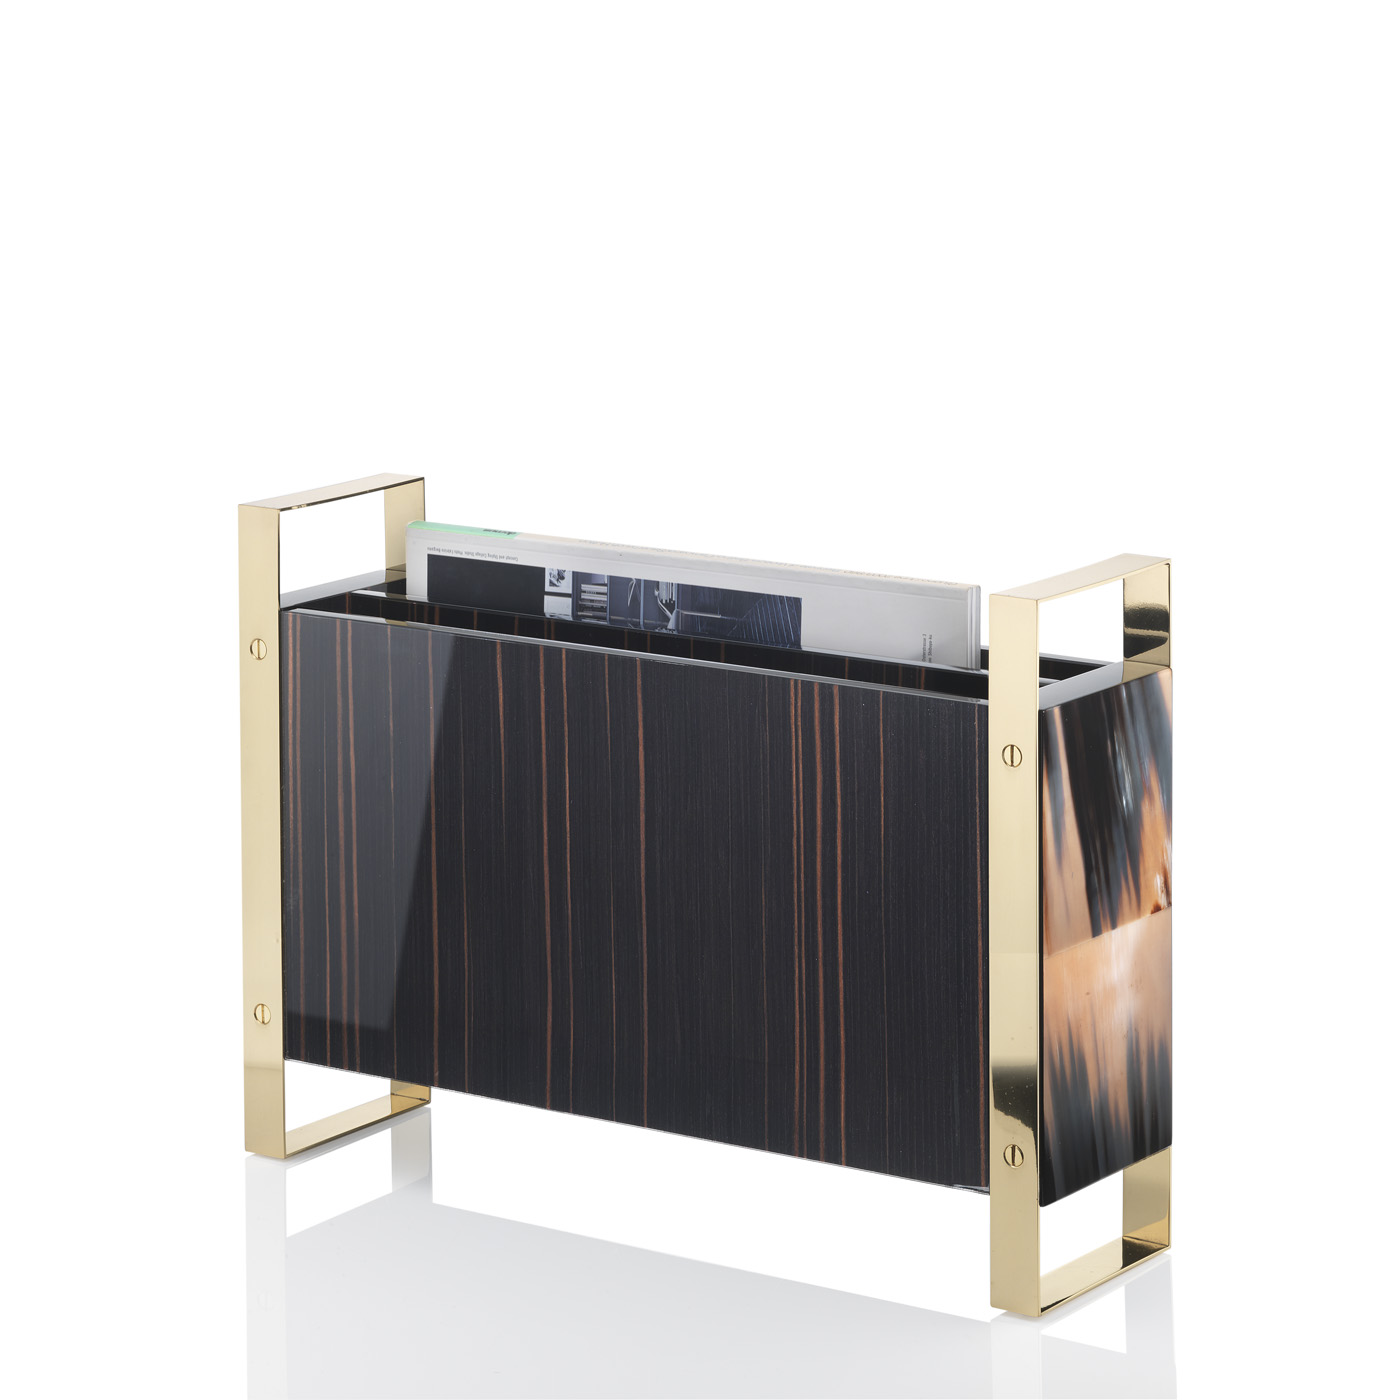 Coat stands and complementary furniture - Dante magazine rack in horn and glossy ebony - Arcahorn